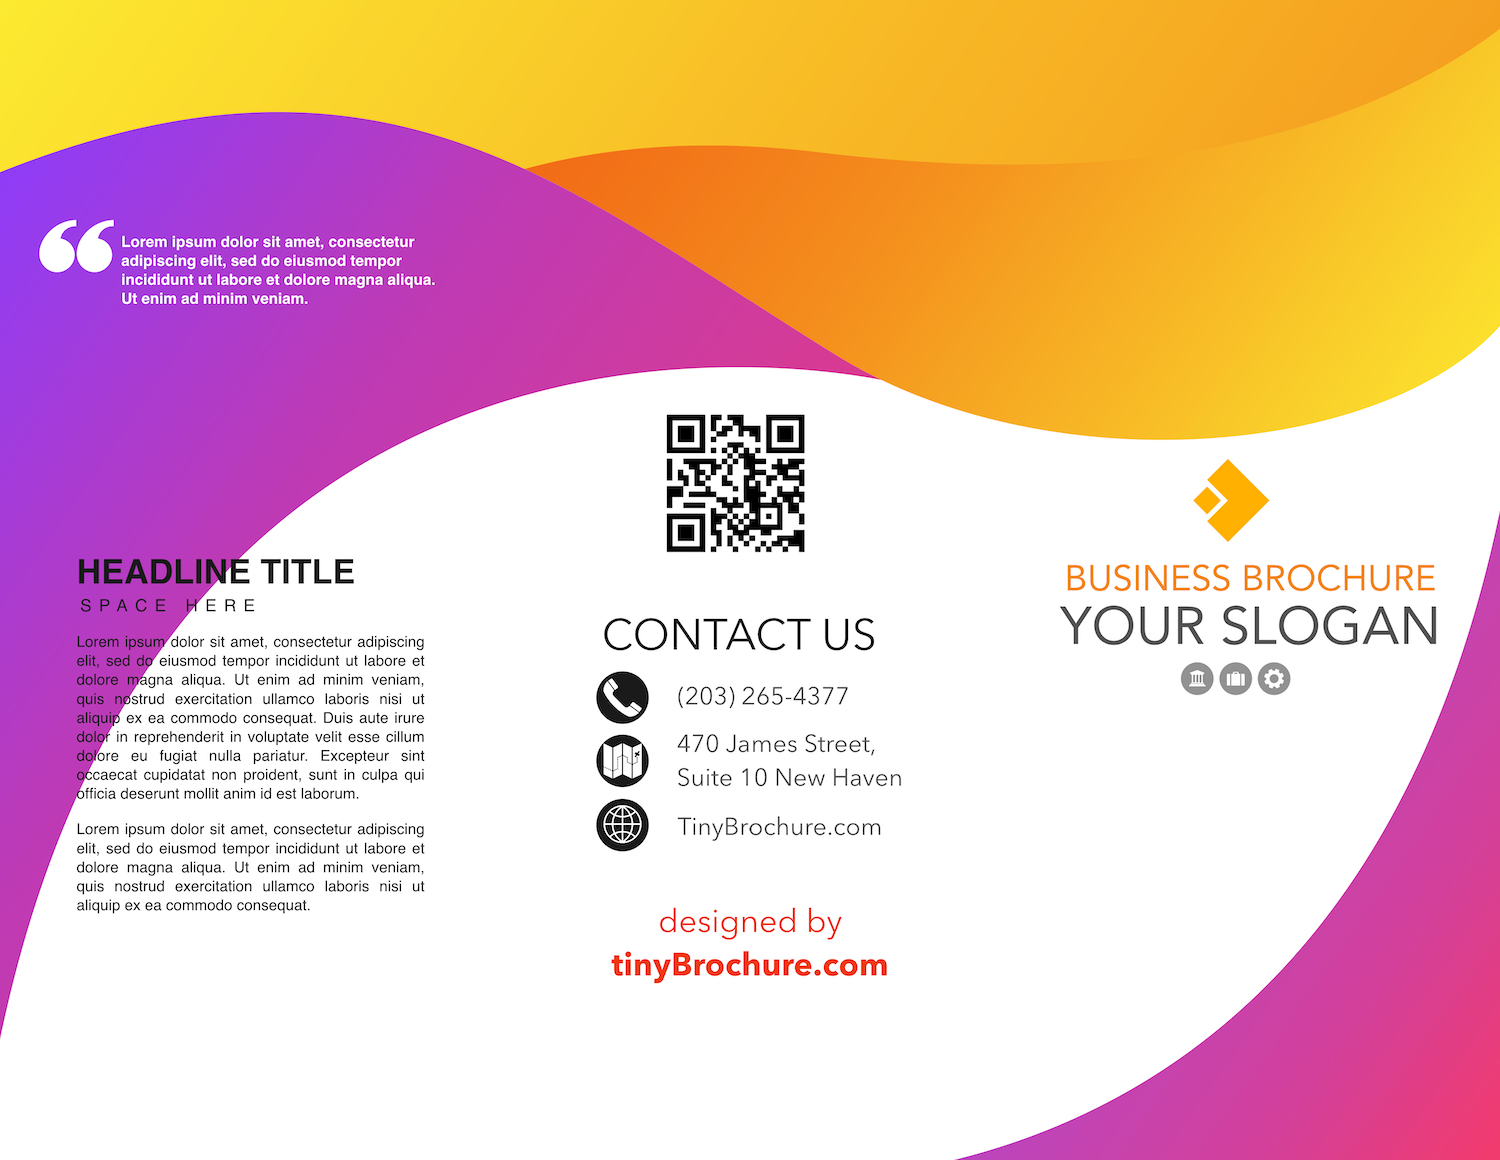 How To Make A Tri Fold Brochure In Google Docs Throughout Google Docs Tri Fold Brochure Template